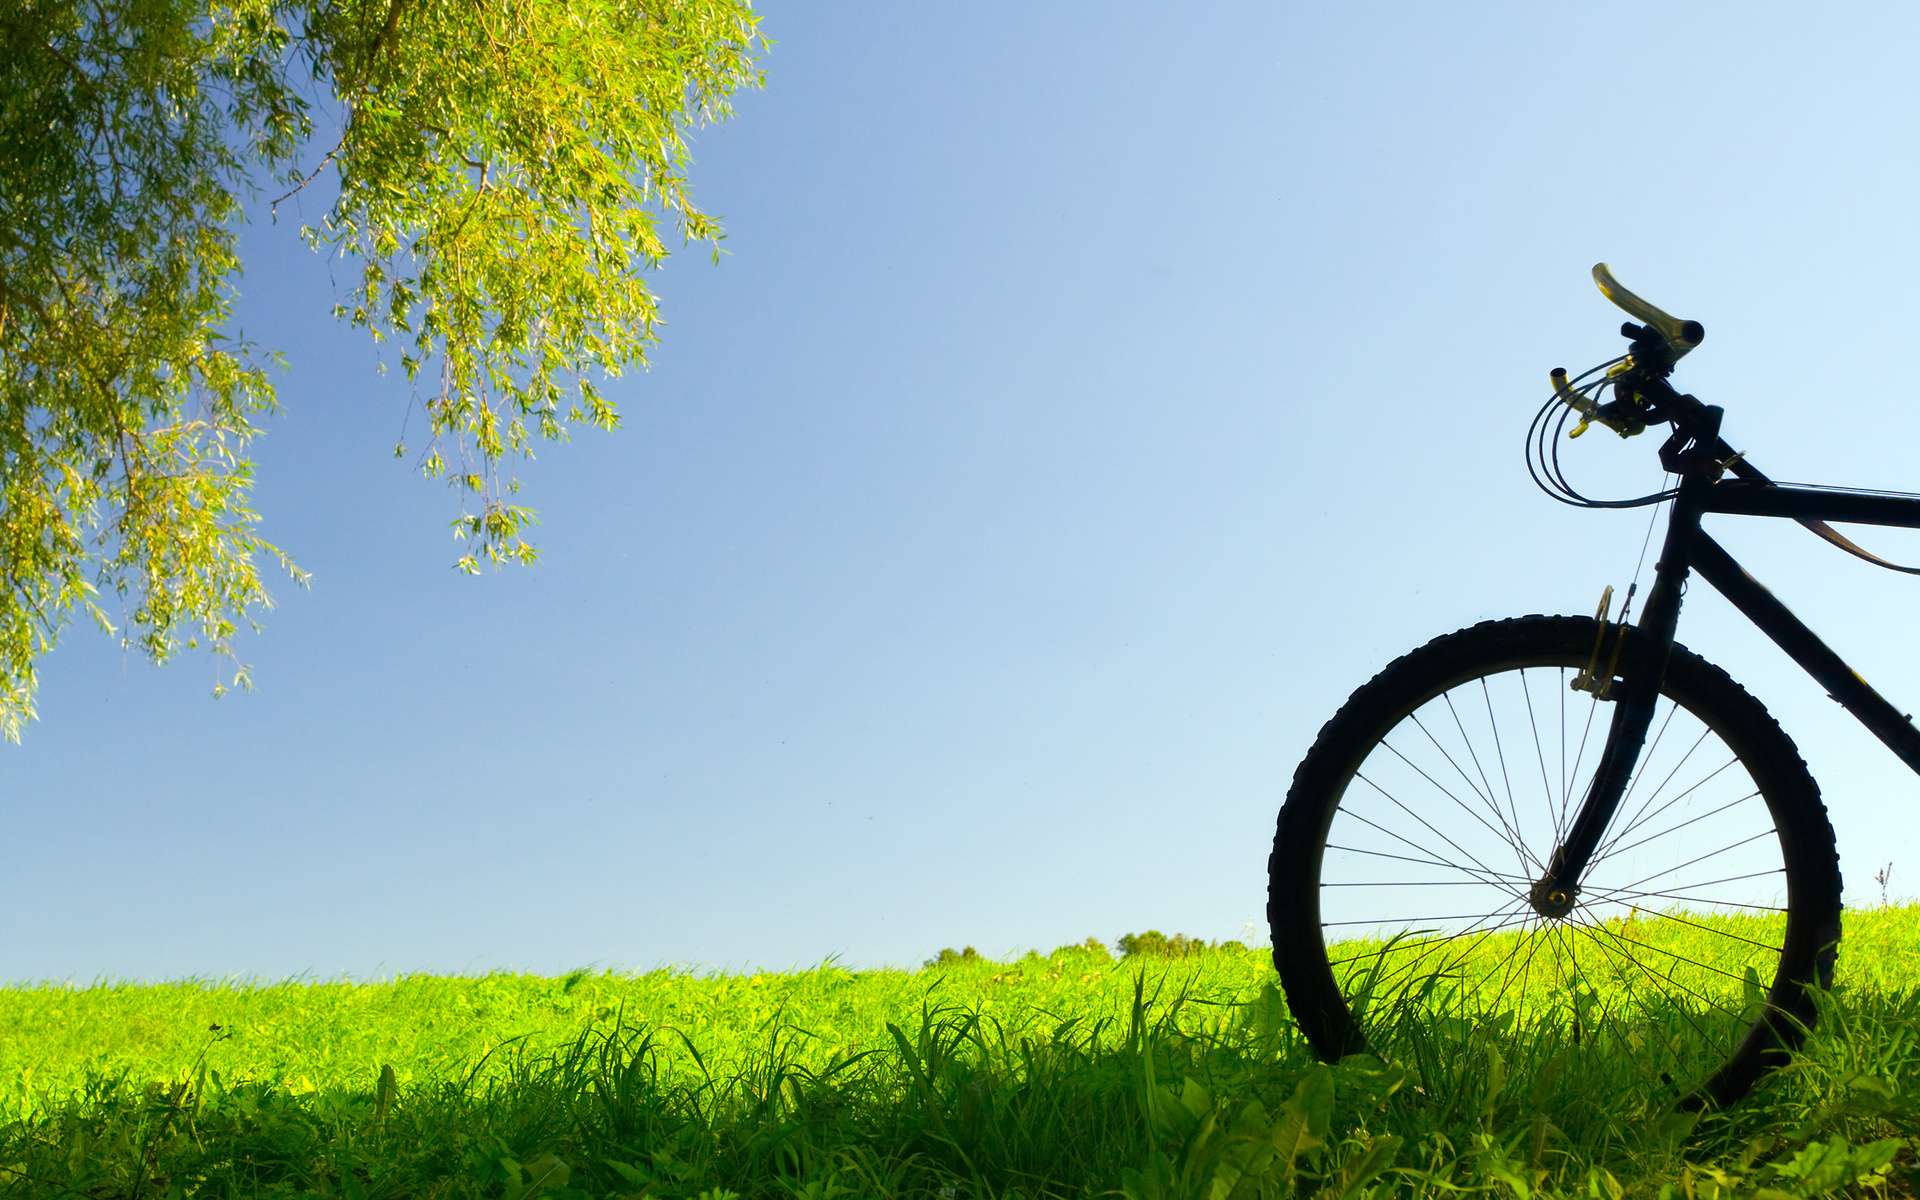 49+] Bicycle Pictures and Wallpapers - WallpaperSafari